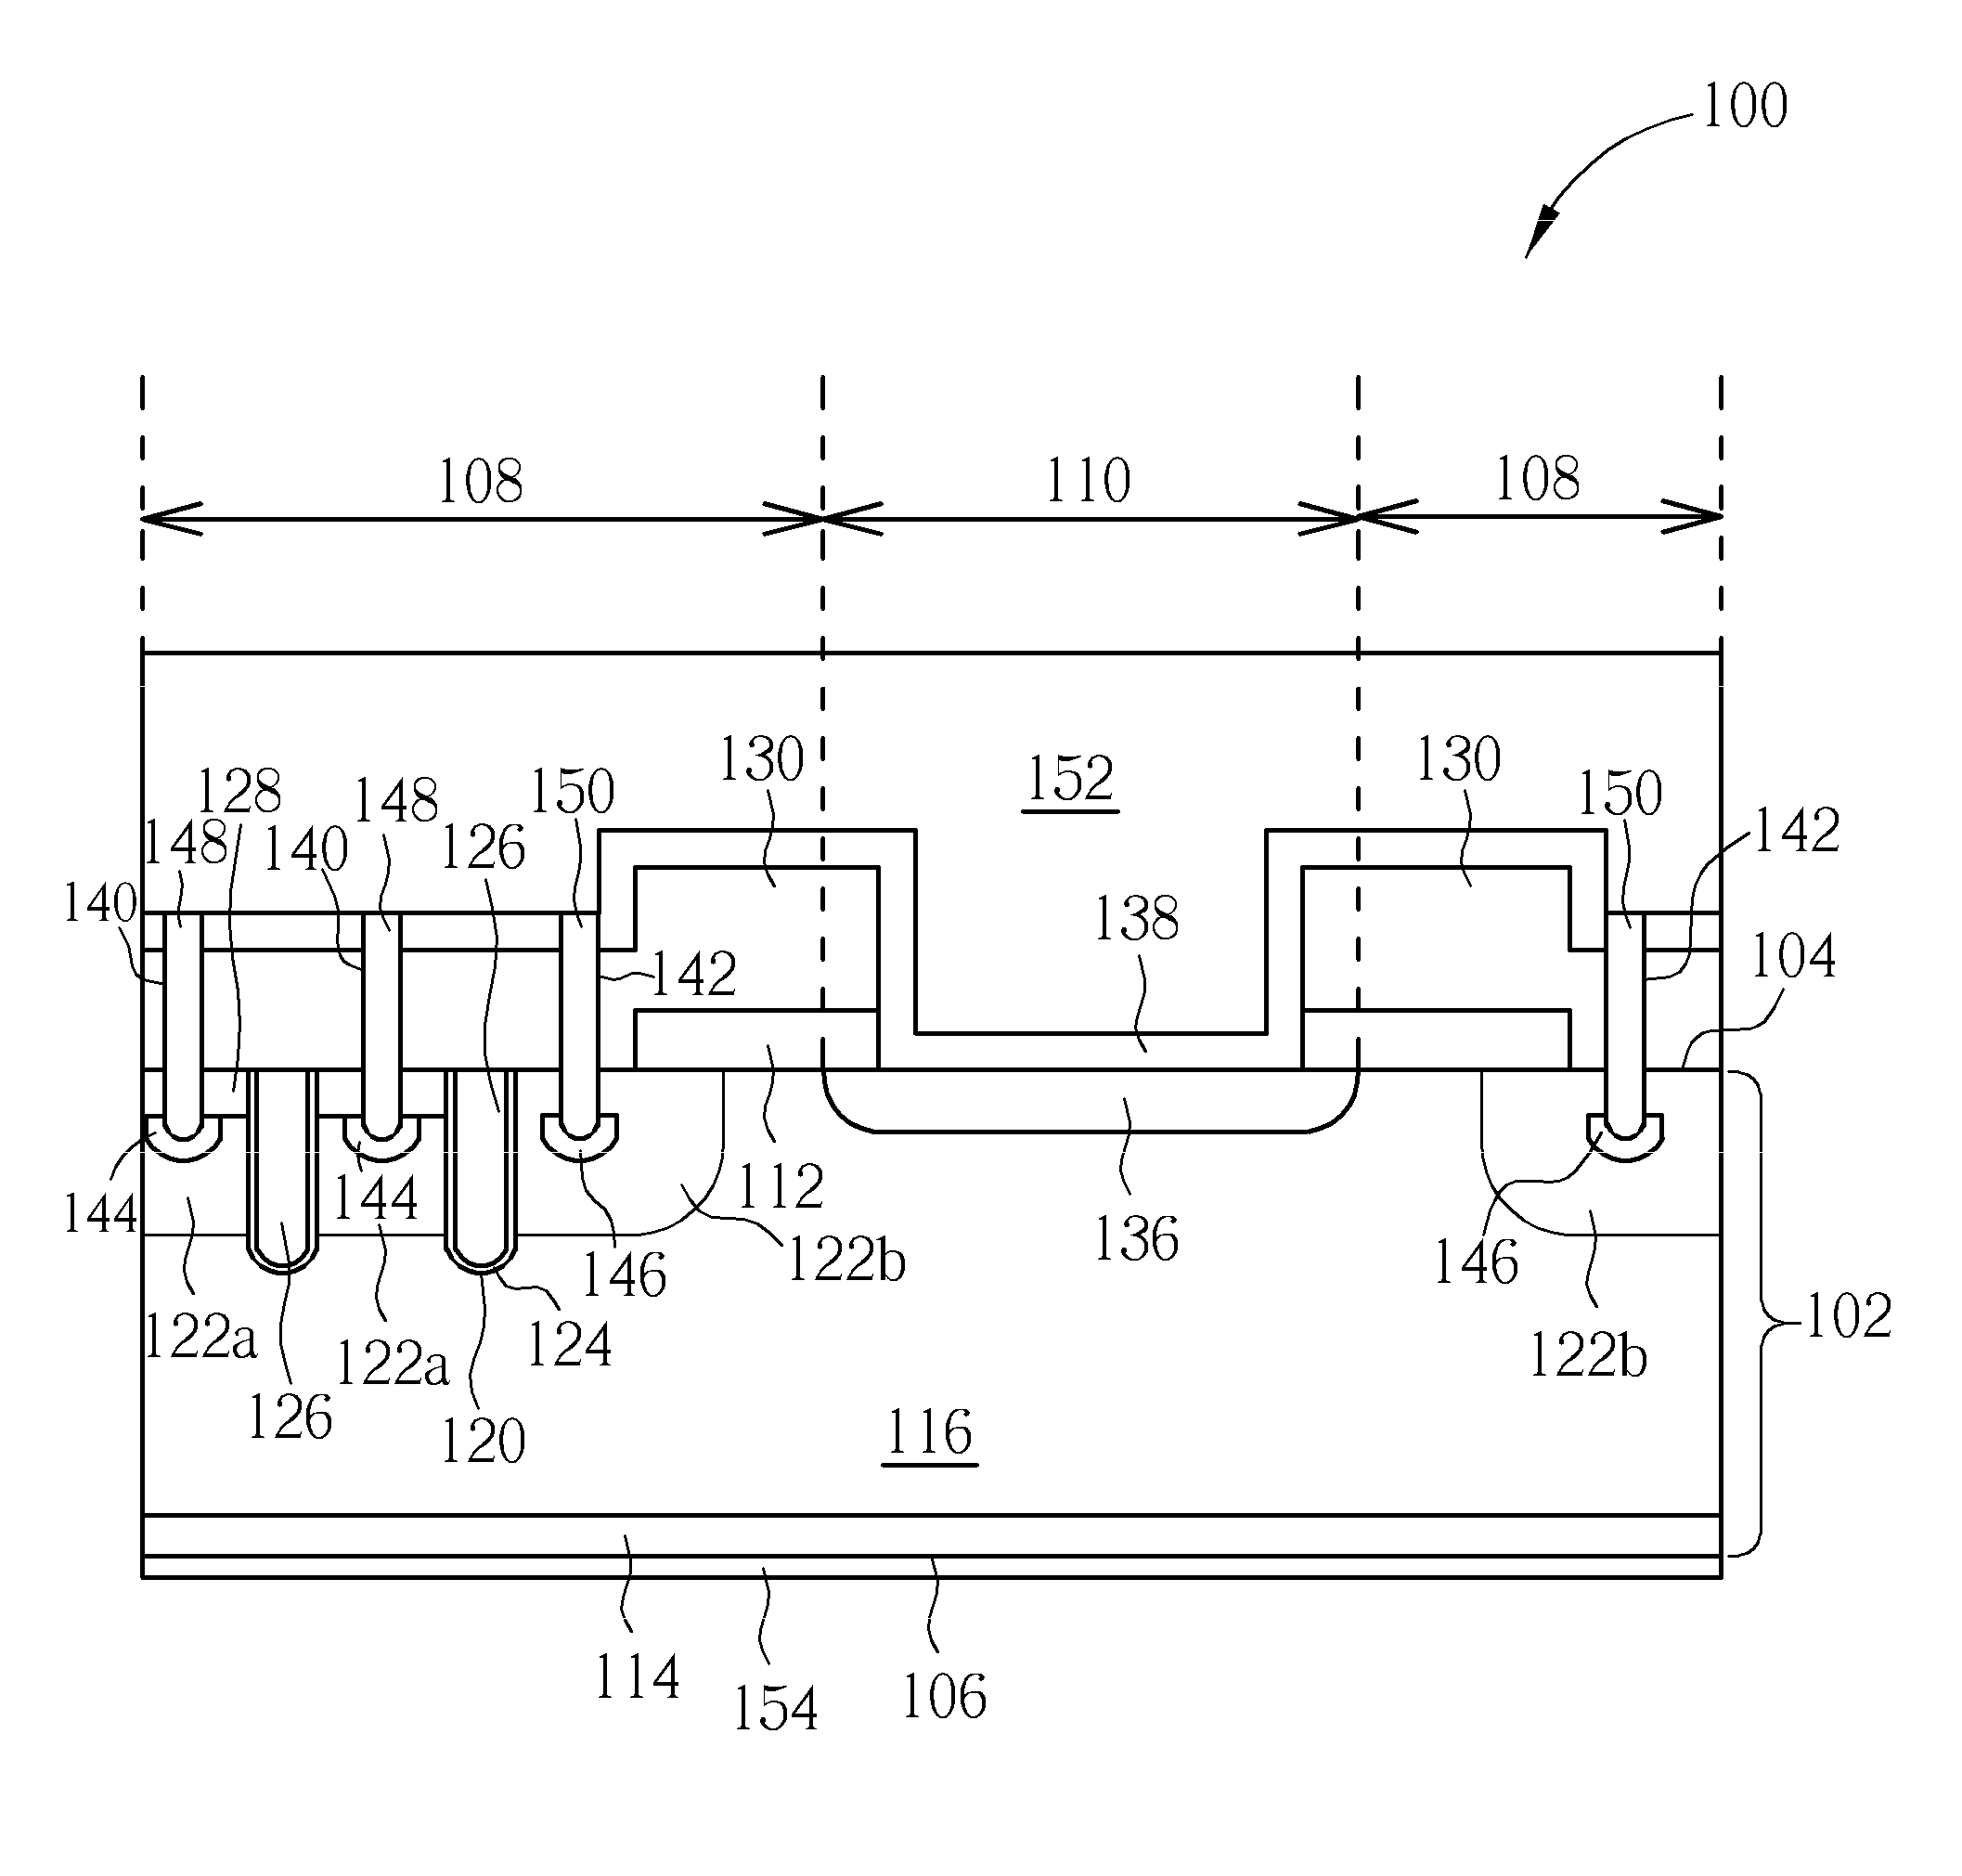 Power semiconductor device having adjustable output capacitance